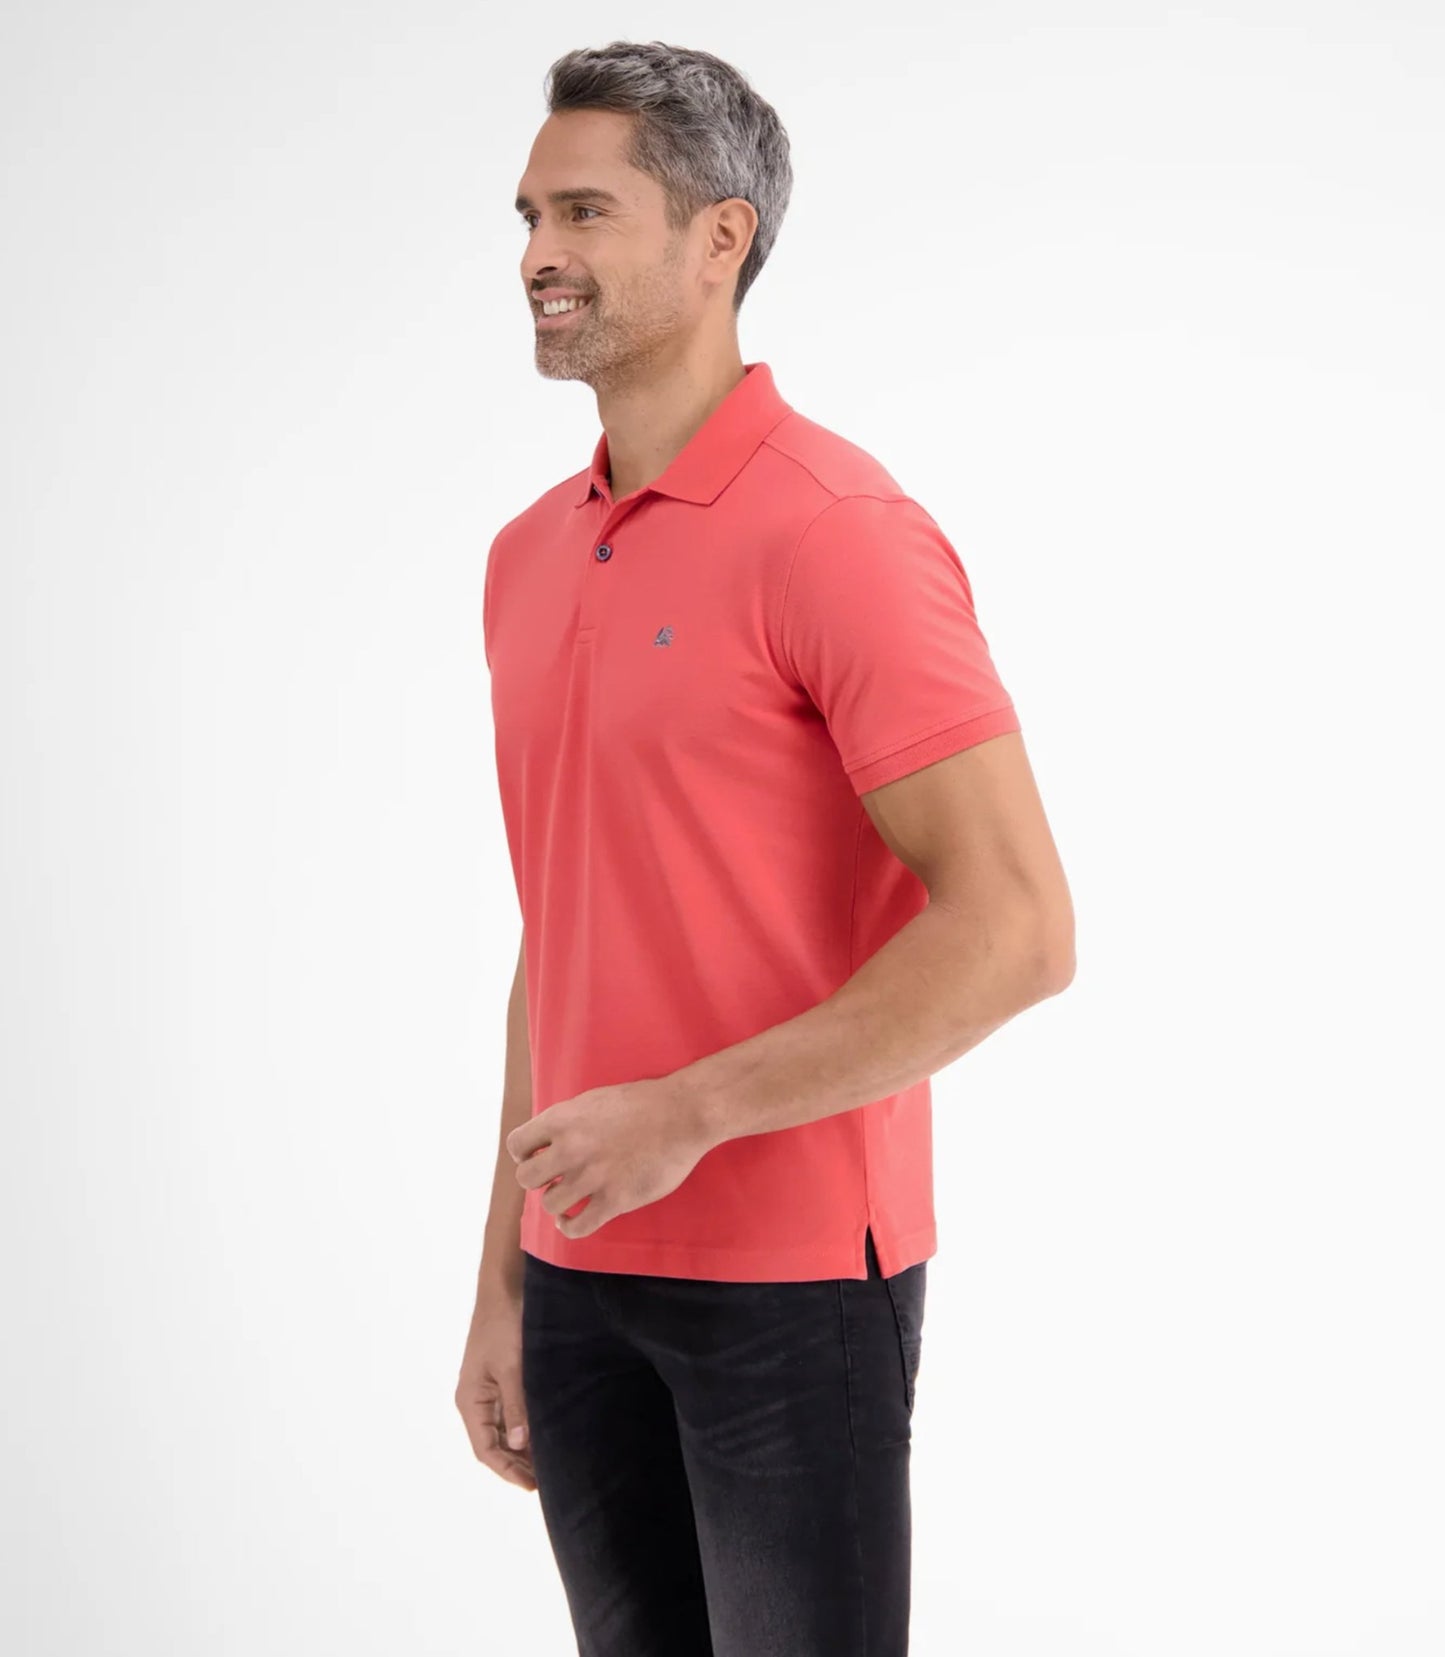 GLS – Hibiscus In High Cotton Red Quality Clothing - Polo-shirt Pique